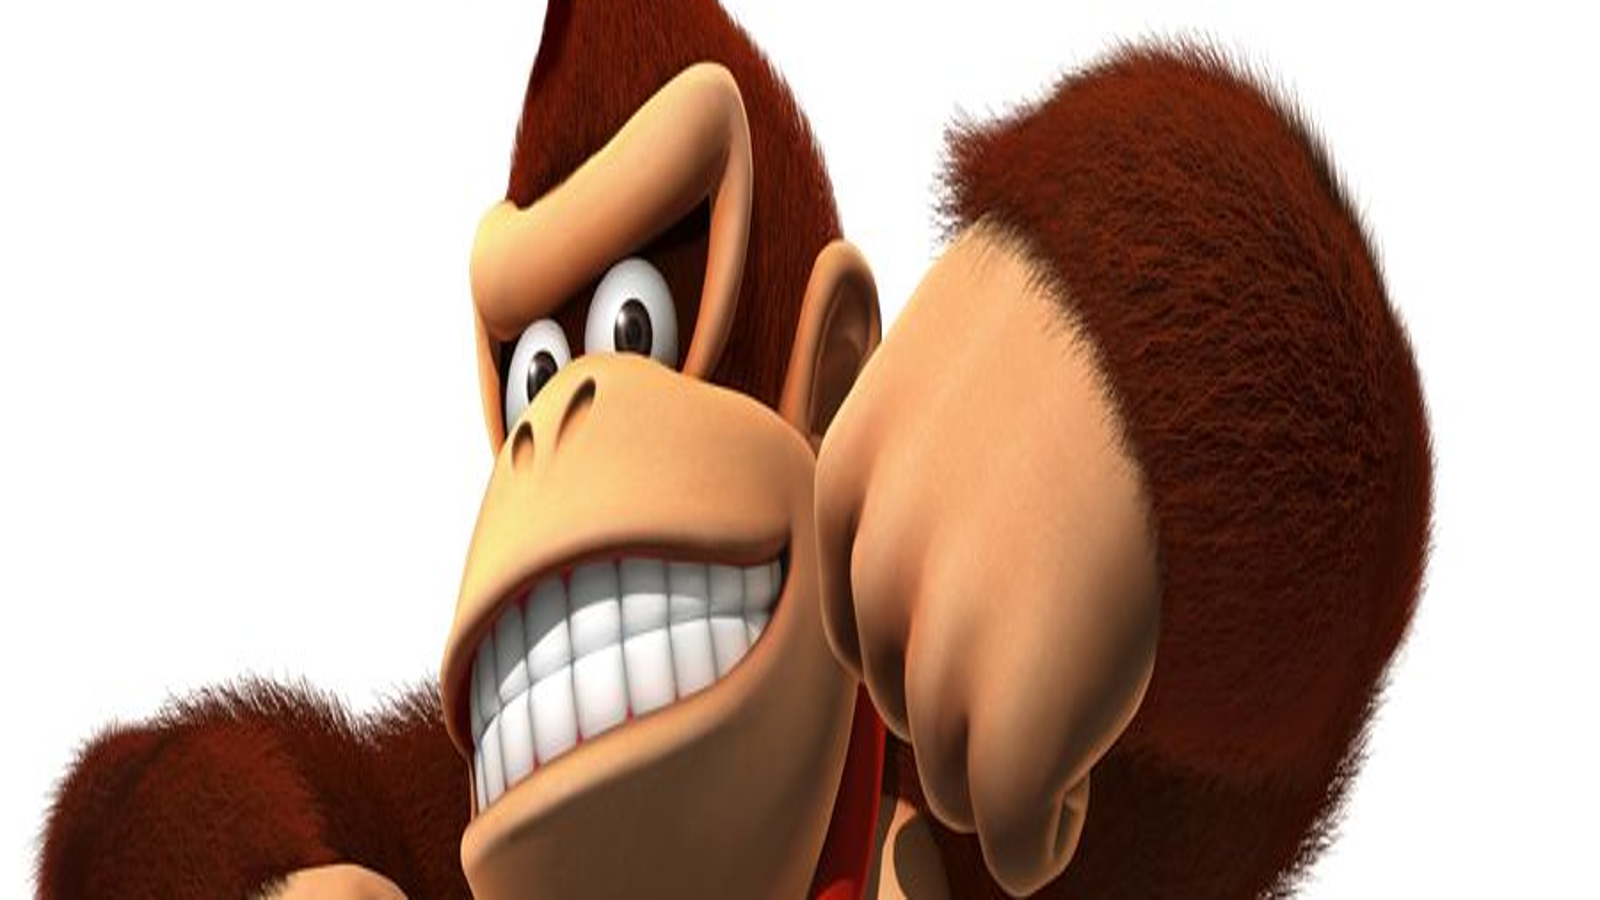 Nintendo Direct - Donkey Kong Country: Tropical Freeze delayed, new Kirby  for 3DS | VG247